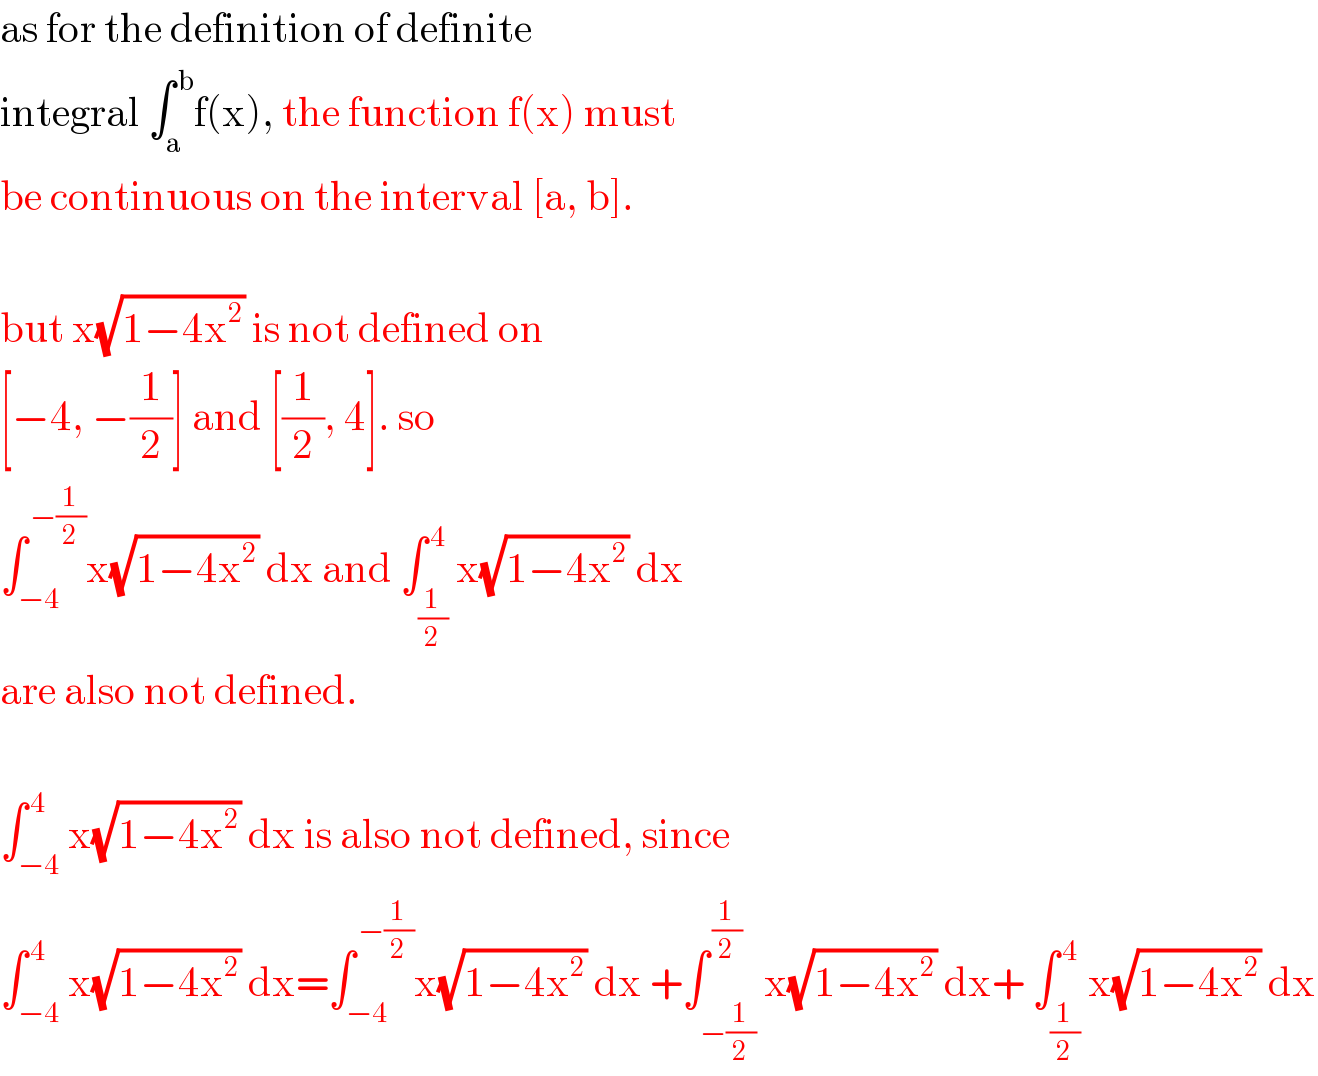 as for the definition of definite  integral ∫_a ^( b) f(x), the function f(x) must  be continuous on the interval [a, b].    but x(√(1−4x^2 )) is not defined on   [−4, −(1/2)] and [(1/2), 4]. so  ∫_(−4) ^( −(1/2)) x(√(1−4x^2 )) dx and ∫_(1/2) ^( 4) x(√(1−4x^2 )) dx  are also not defined.    ∫_(−4) ^( 4) x(√(1−4x^2 )) dx is also not defined, since  ∫_(−4) ^( 4) x(√(1−4x^2 )) dx=∫_(−4) ^( −(1/2)) x(√(1−4x^2 )) dx +∫_(−(1/2)) ^( (1/2)) x(√(1−4x^2 )) dx+ ∫_(1/2) ^( 4) x(√(1−4x^2 )) dx  